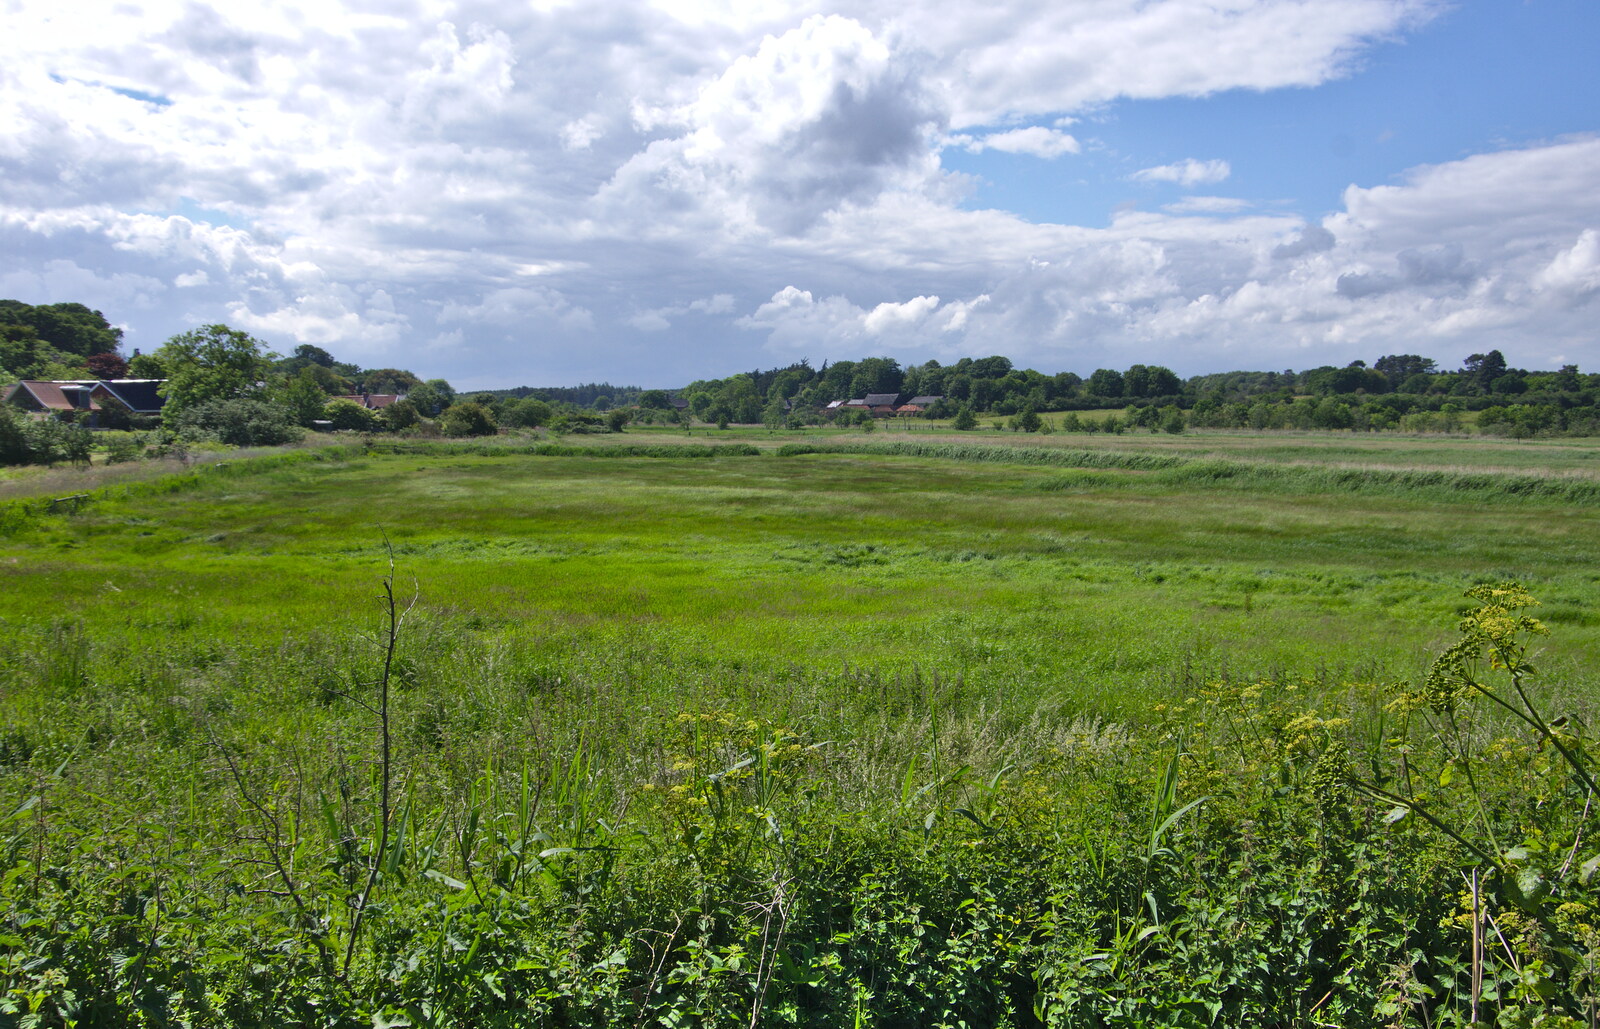 A view over the salt marshes from Cliff House Camping, Dunwich, Suffolk - 15th June 2019